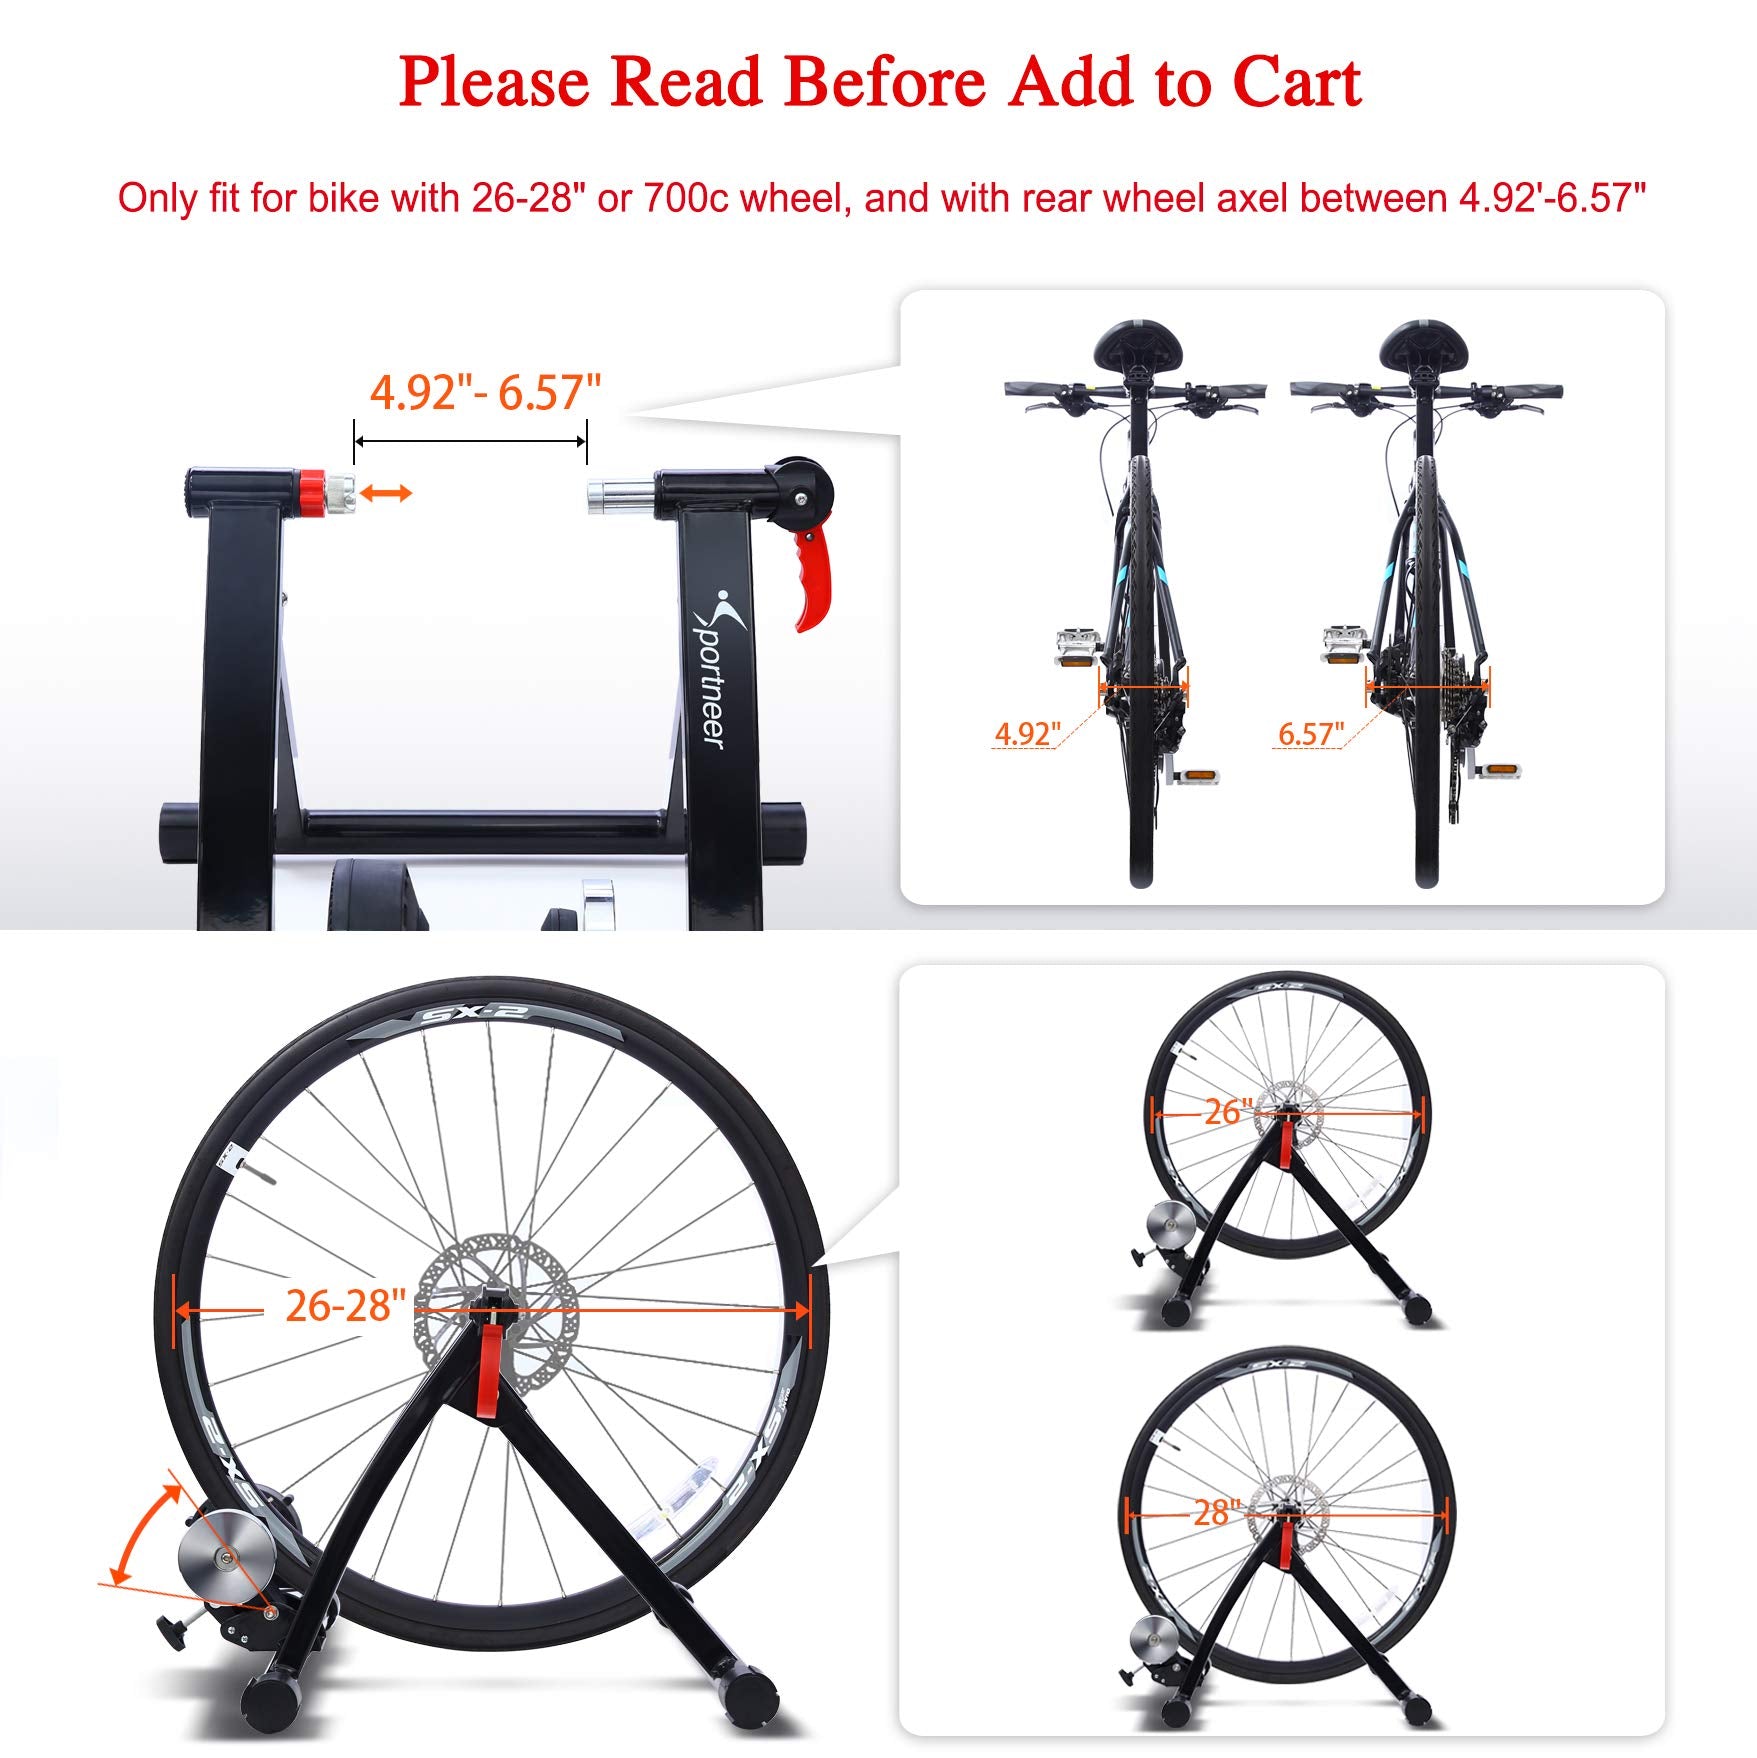 sportneer bike trainer stand steel bicycle exercise magnetic stand